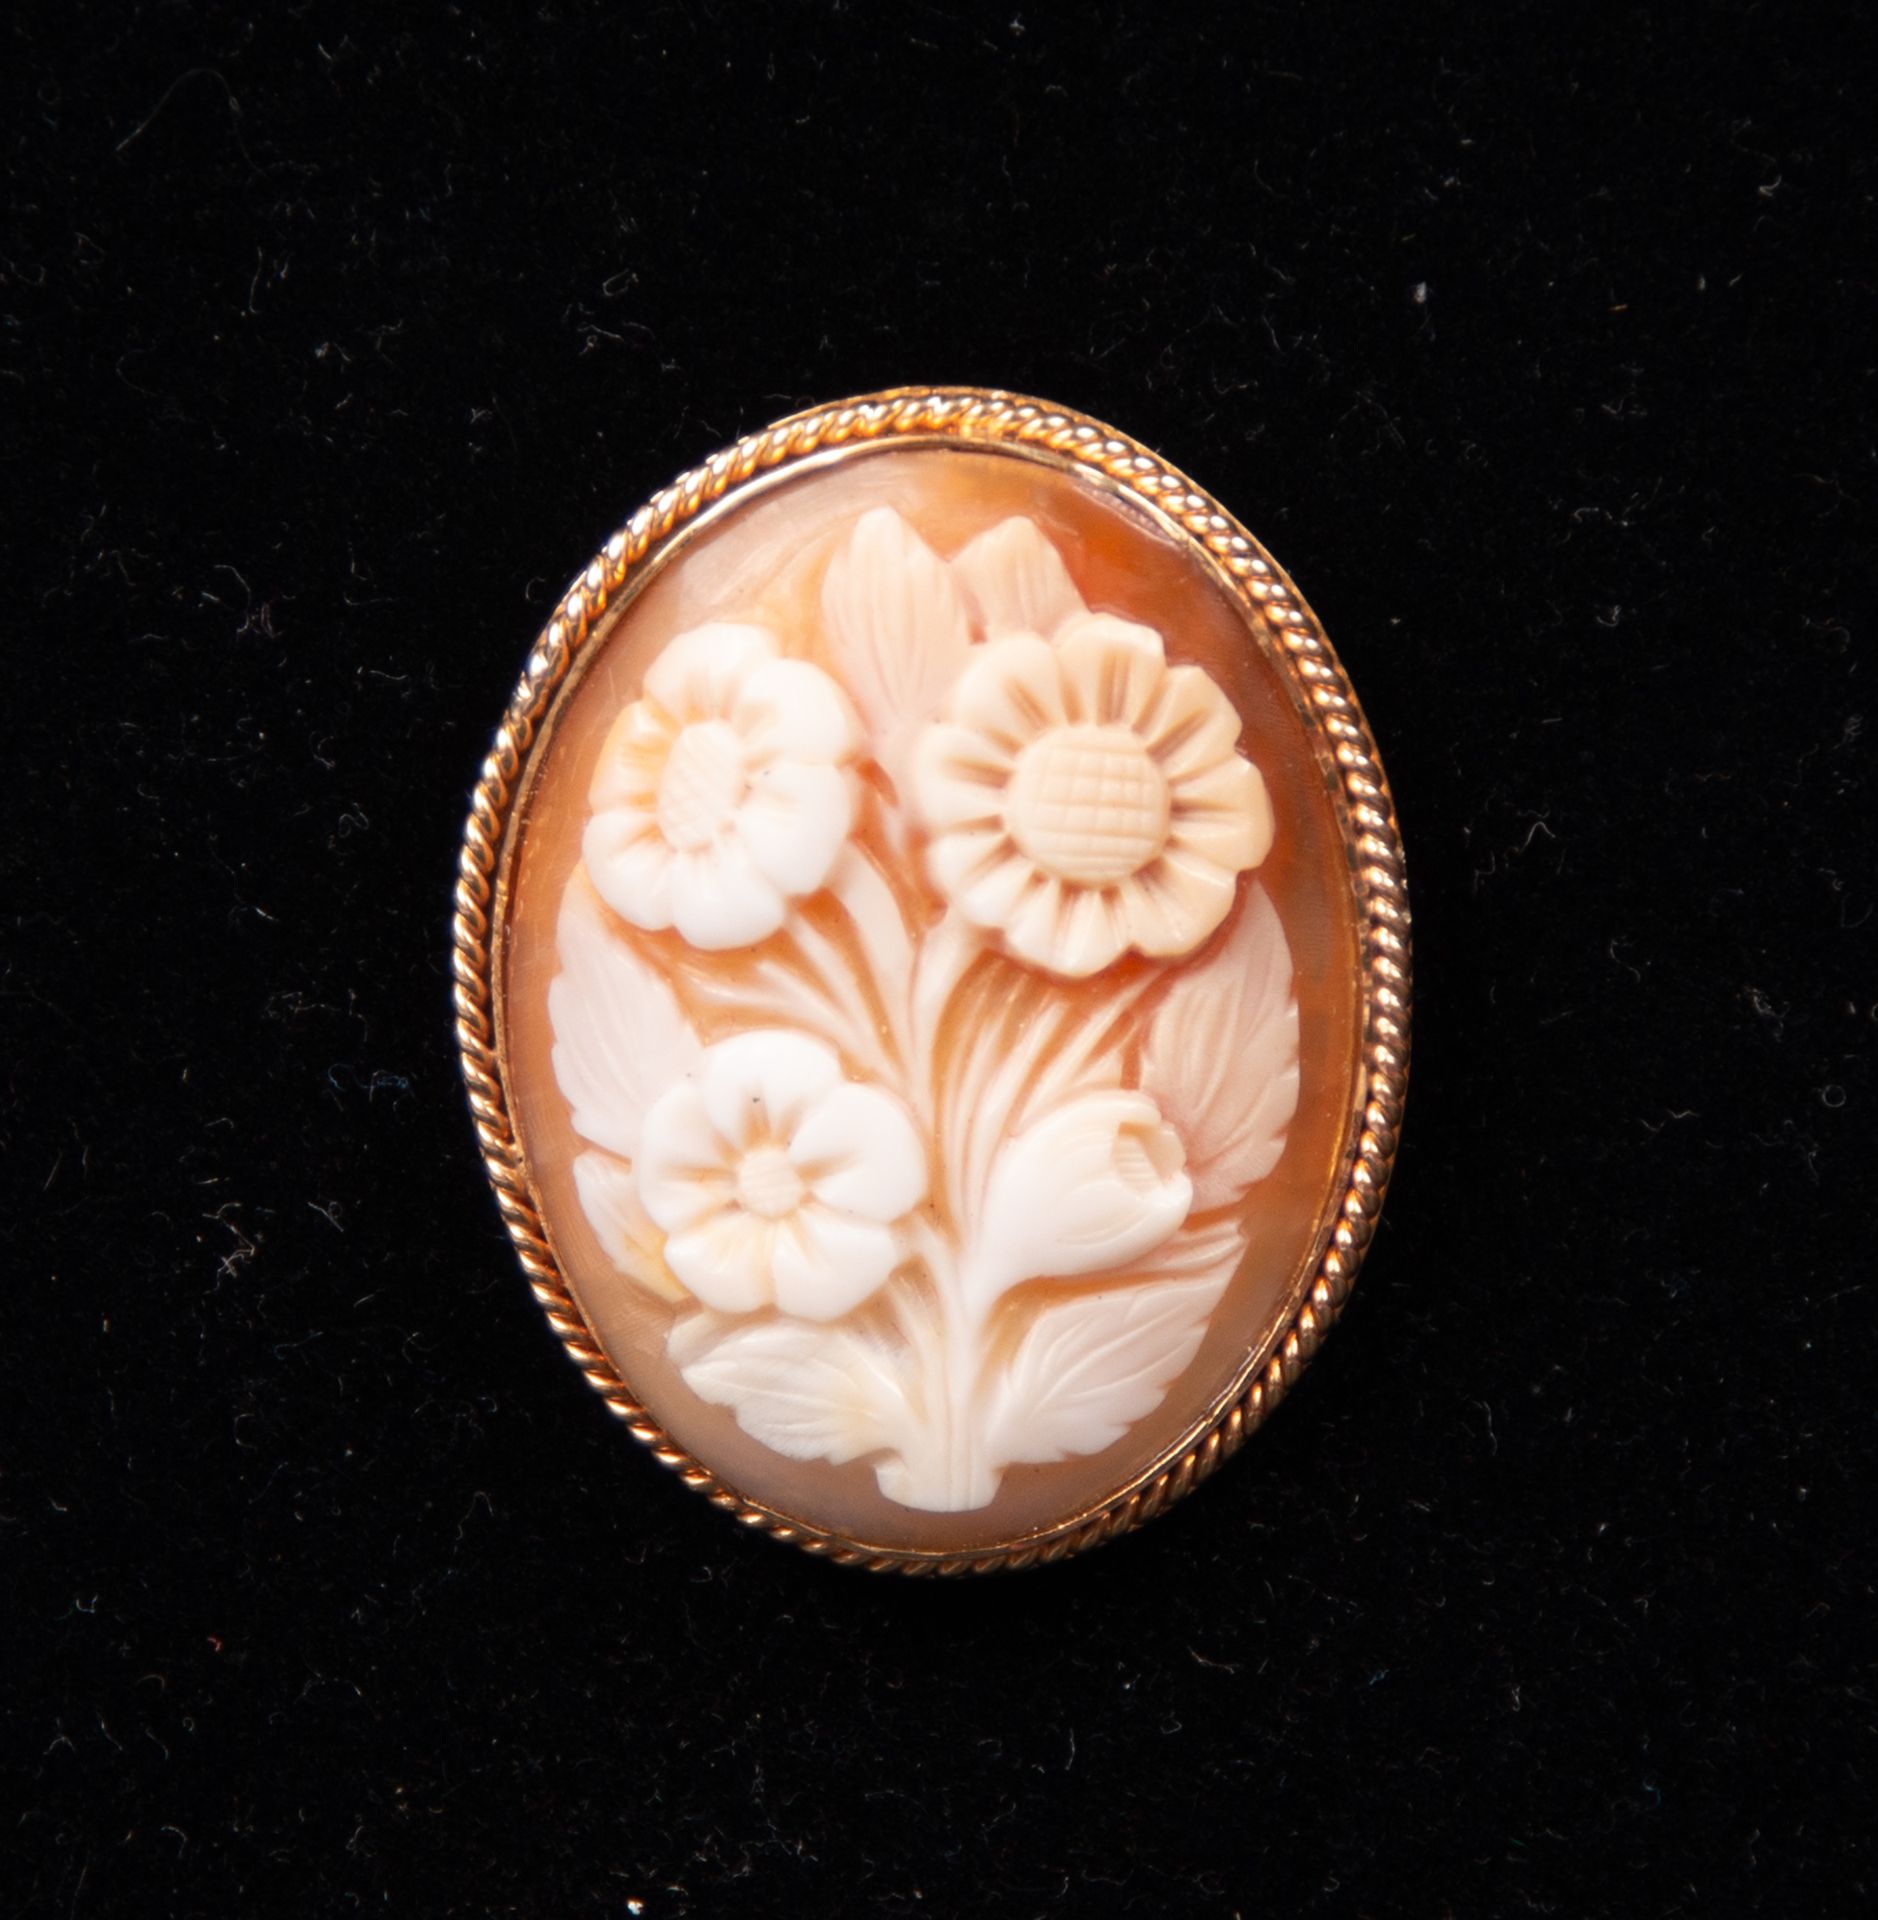 Cameo Pendant mounted in Gold, 19th century